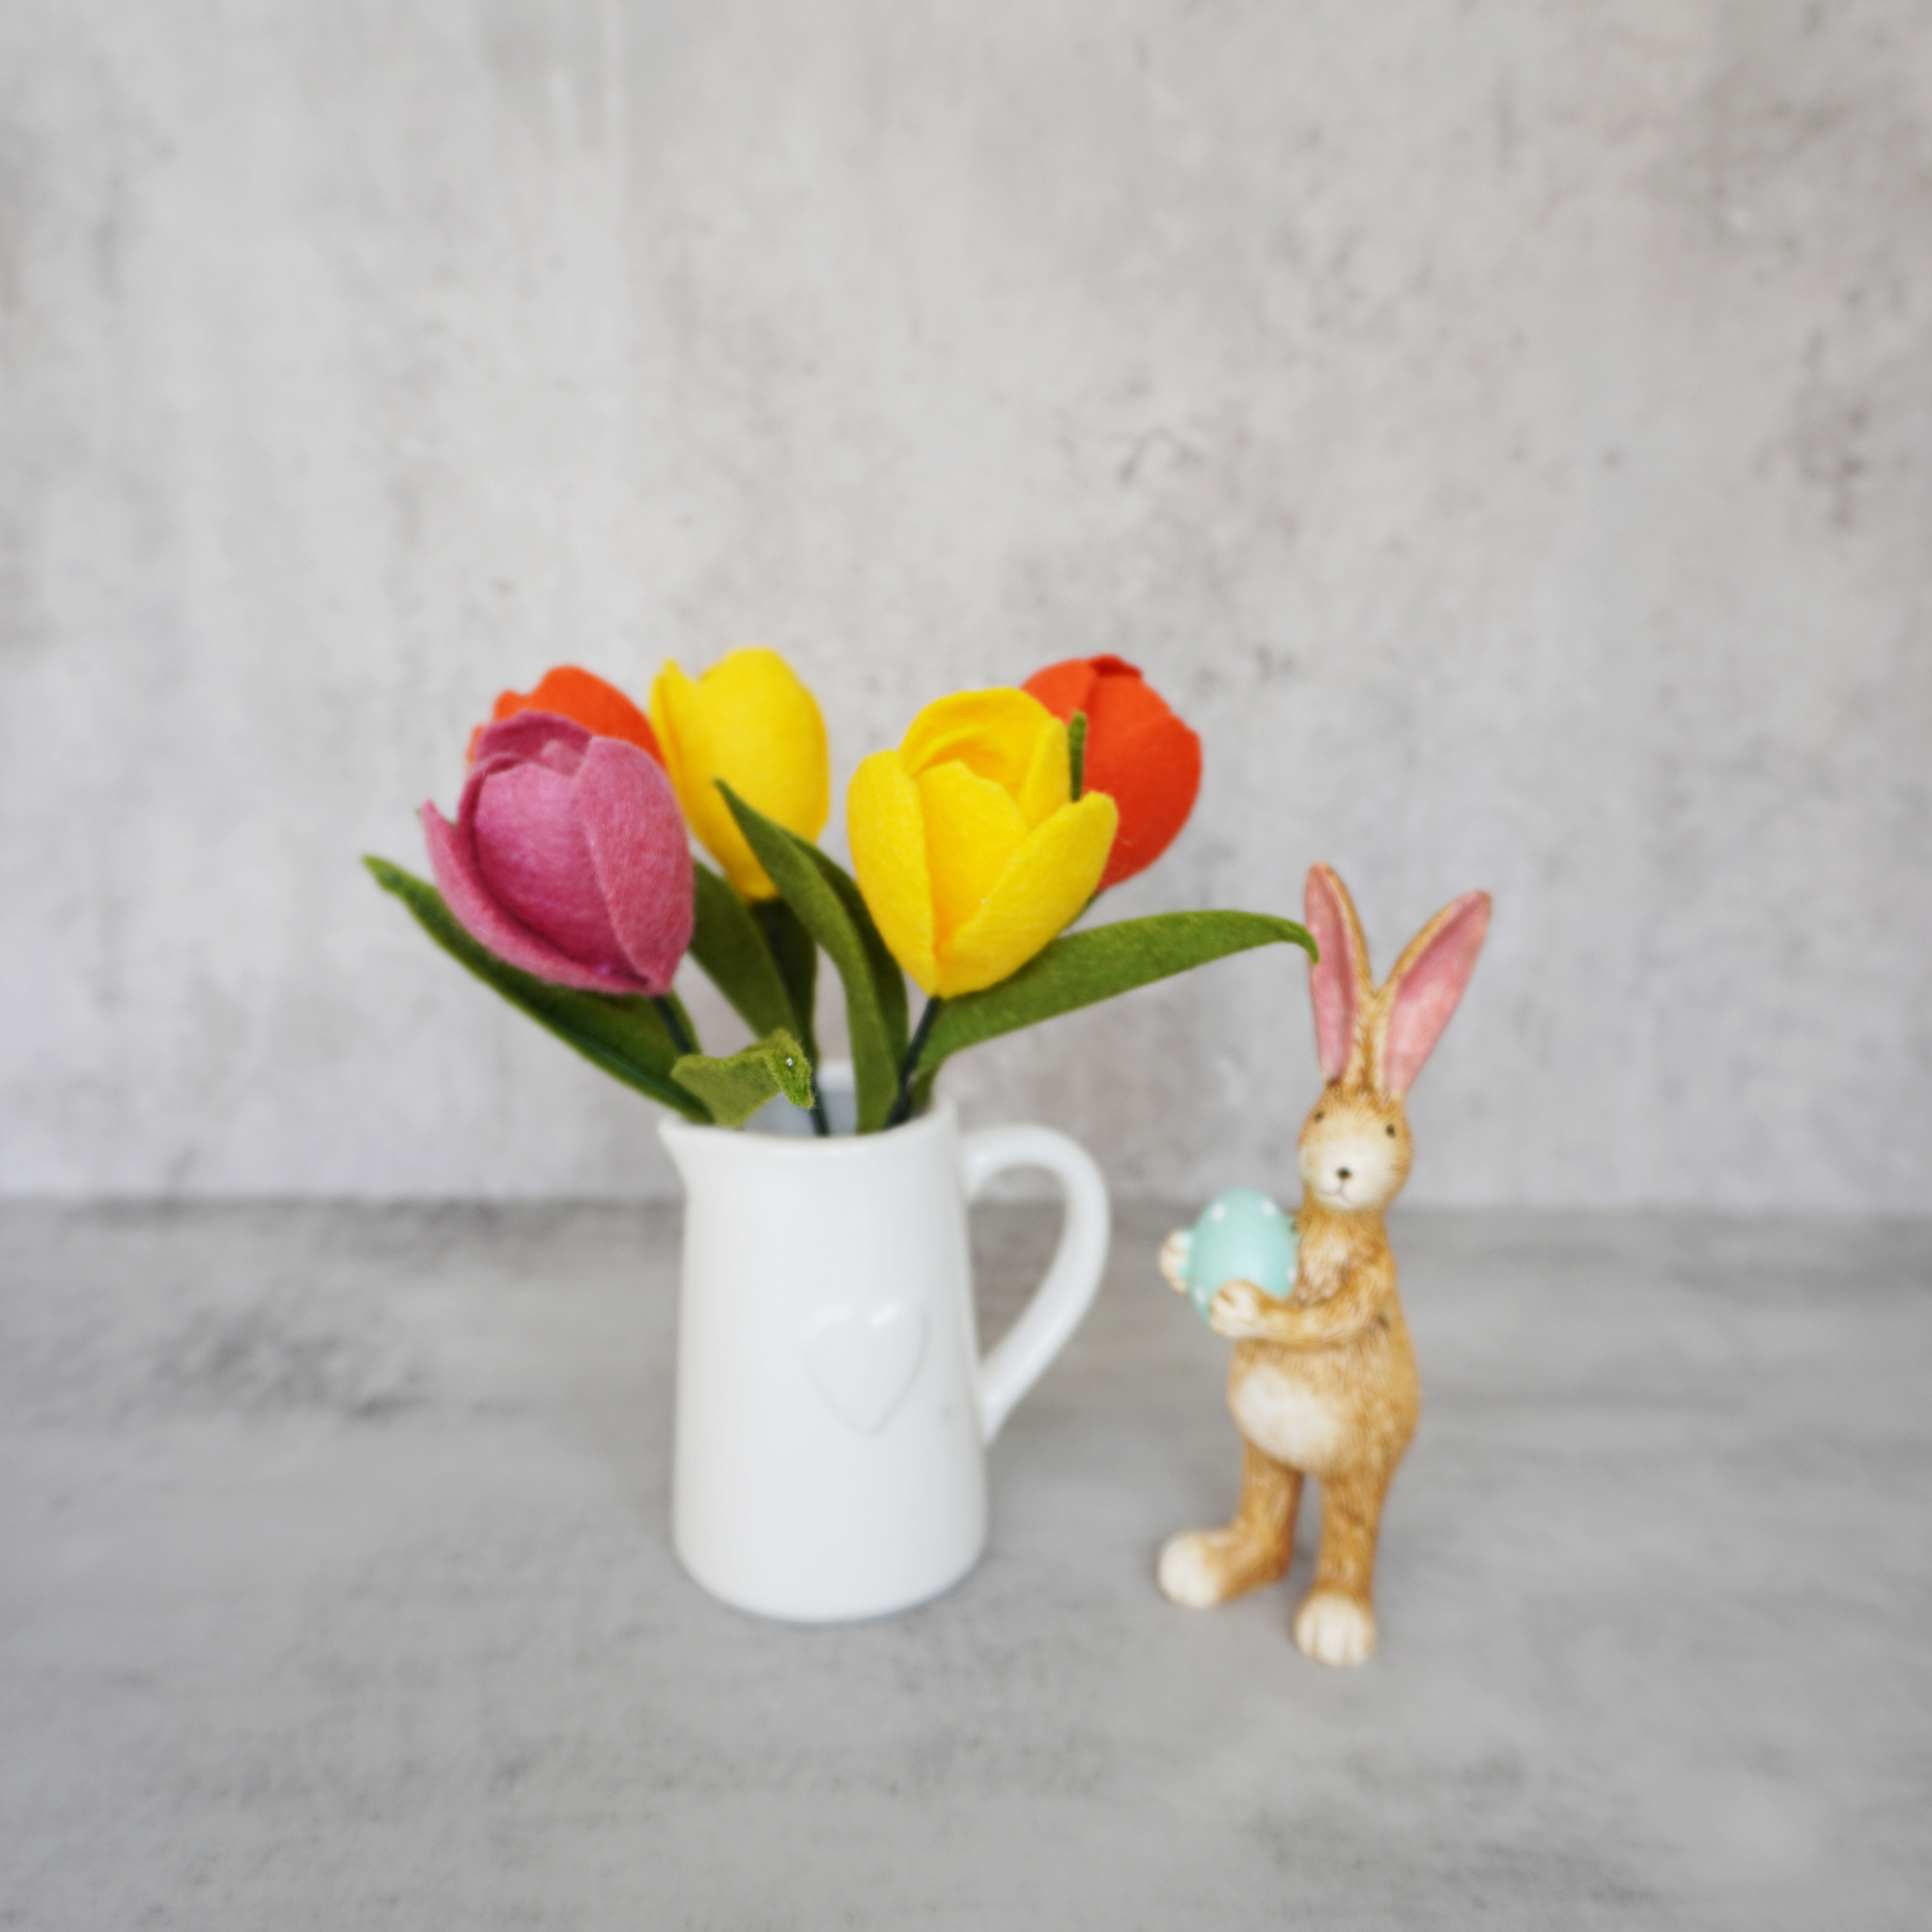 Easter Hamper felt flower Tulip bouquet with ceramic jar and a standing bunny - 2